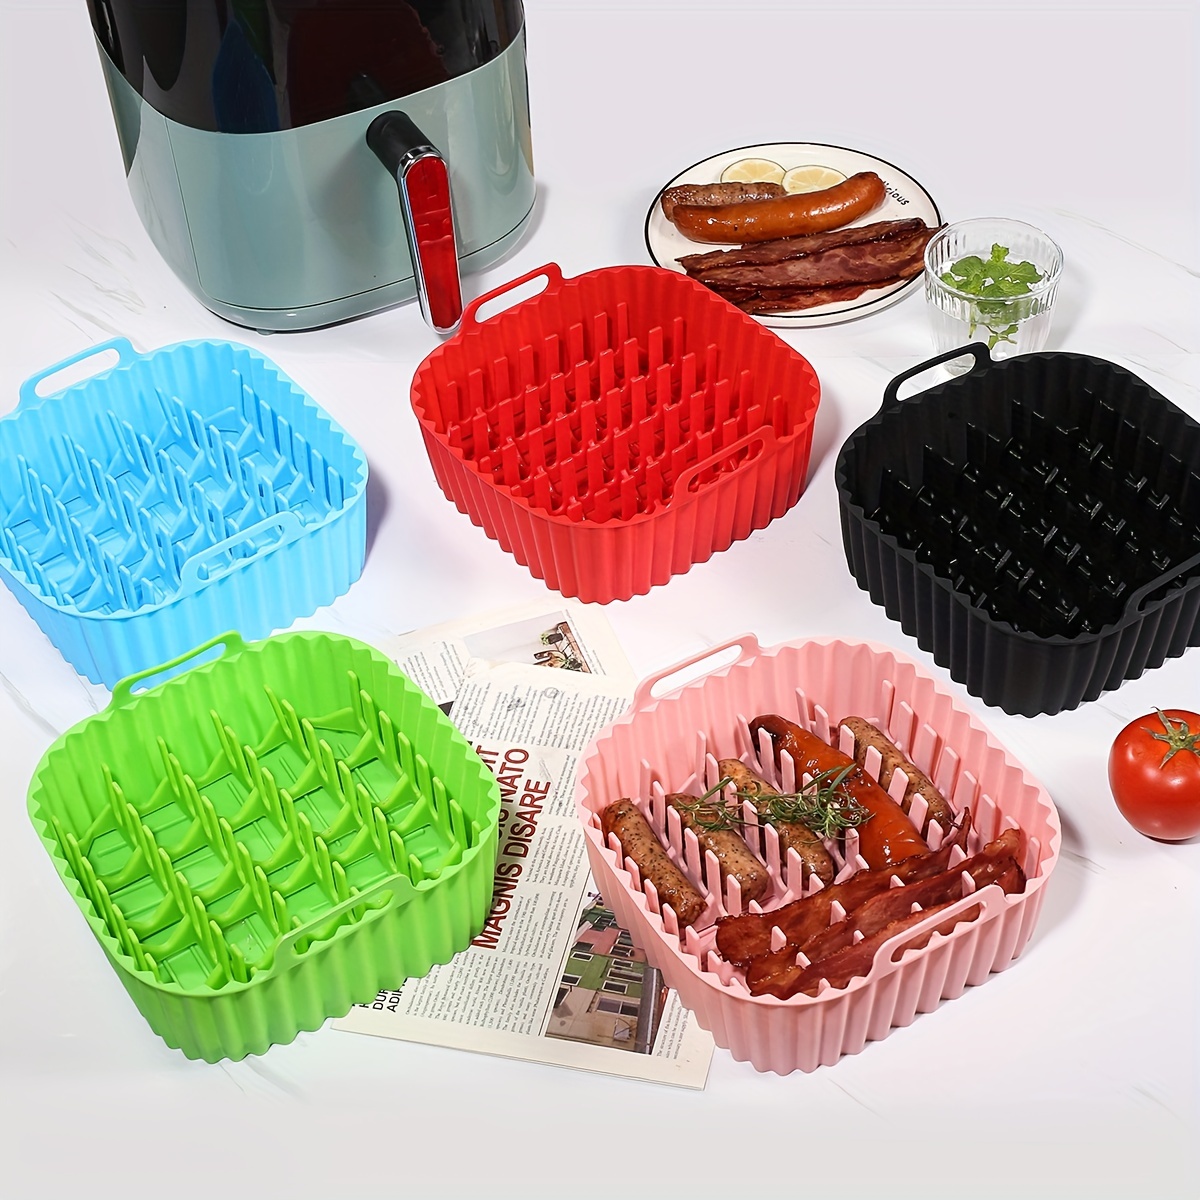 Silicone Air Fryer Liner With Bacon Grill Rack, Square Air Fryer Liners  Pot, Silicone Basket Bowl Fits 7qt Air Fryers, Reusable Baking Tray,  Dishwasher Safe, Oven Accessories, Baking Tools, Kitchen Gadgets, Kitchen